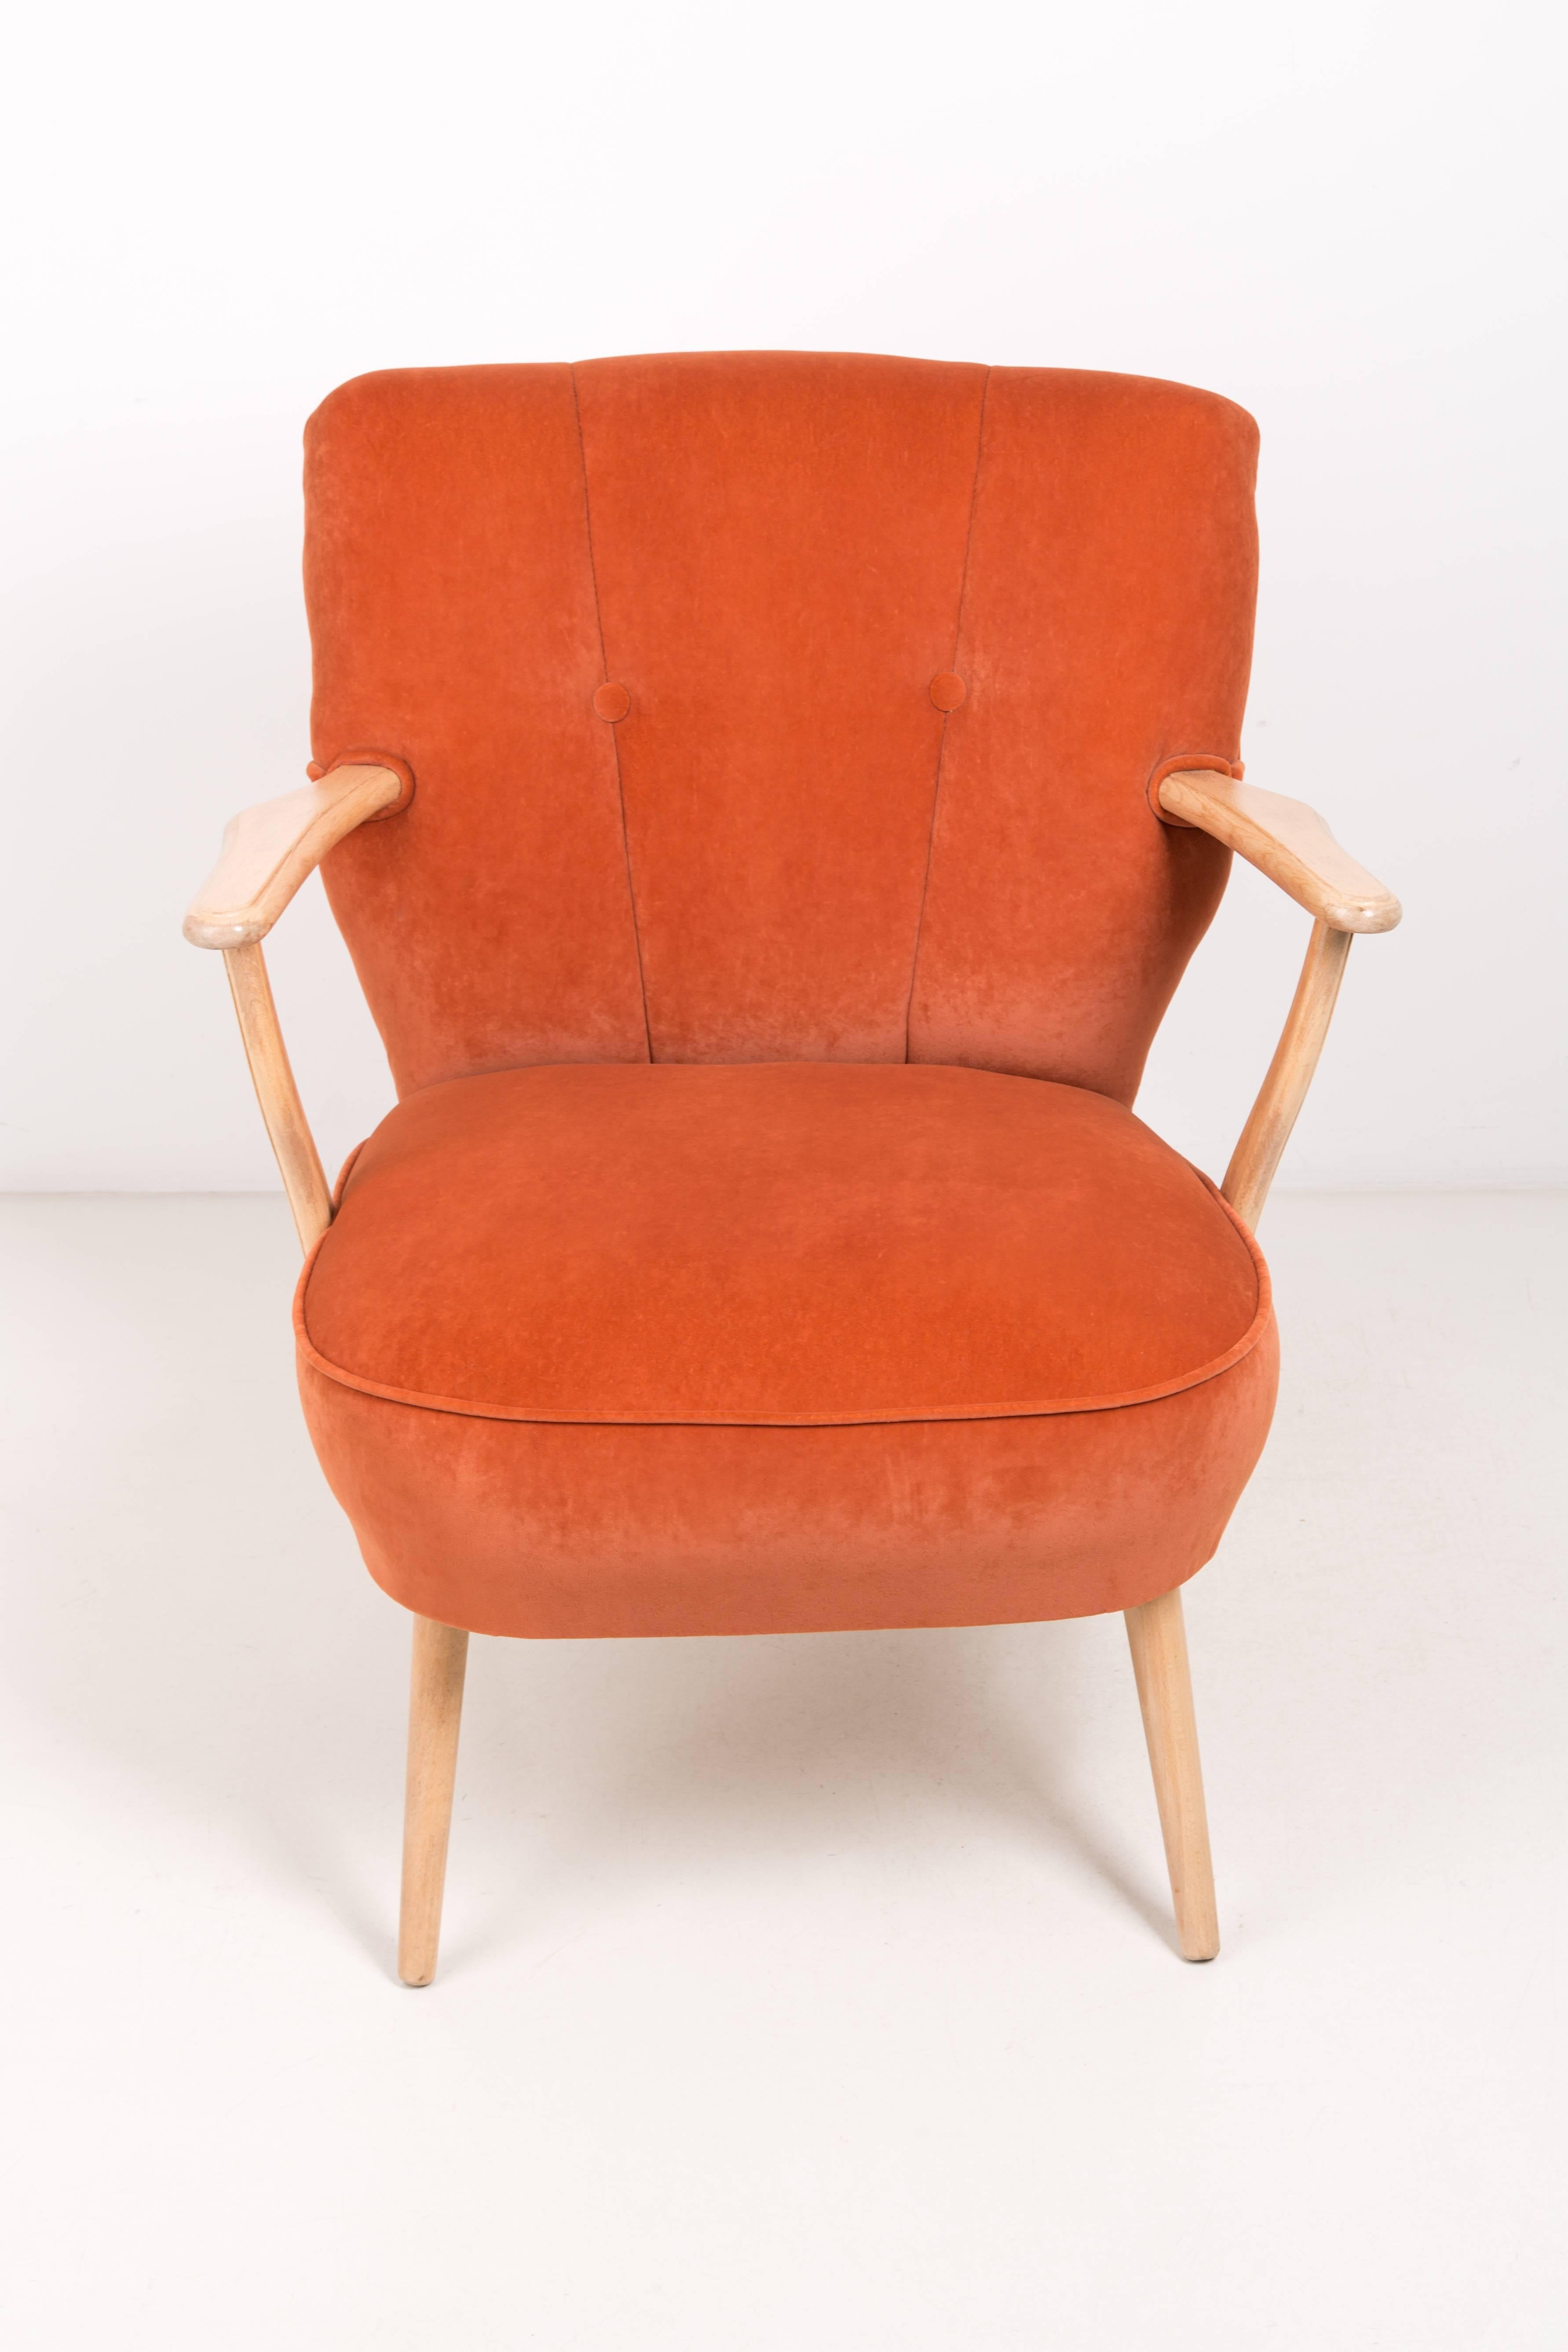 Hand-Crafted Pair of Midcentury Orange Cocktail Armchairs, Germany, 1960s For Sale